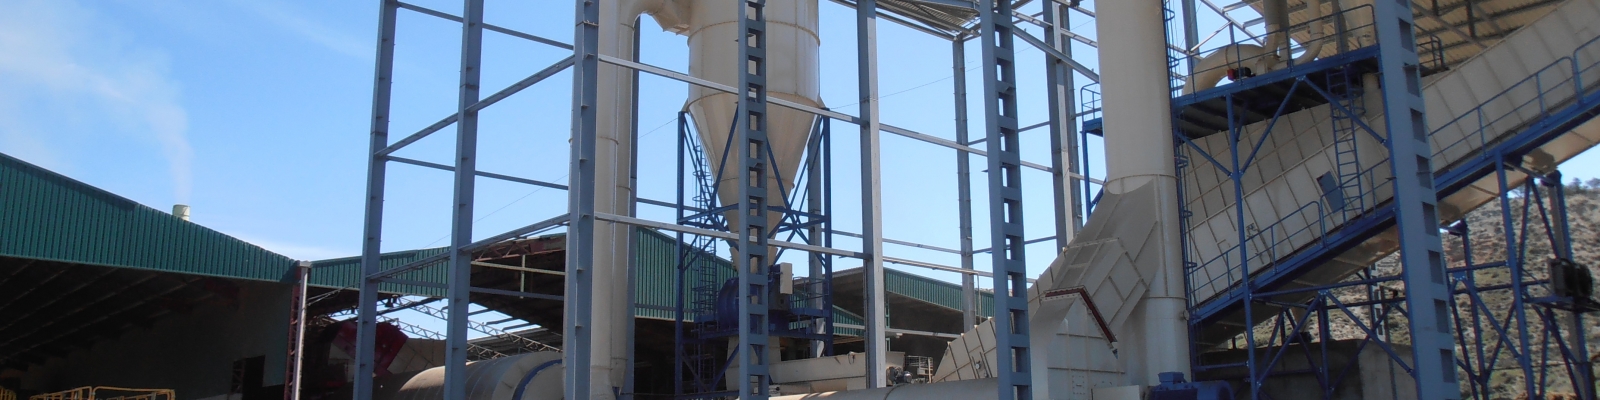 The processing of Alfalfa into feed pellets